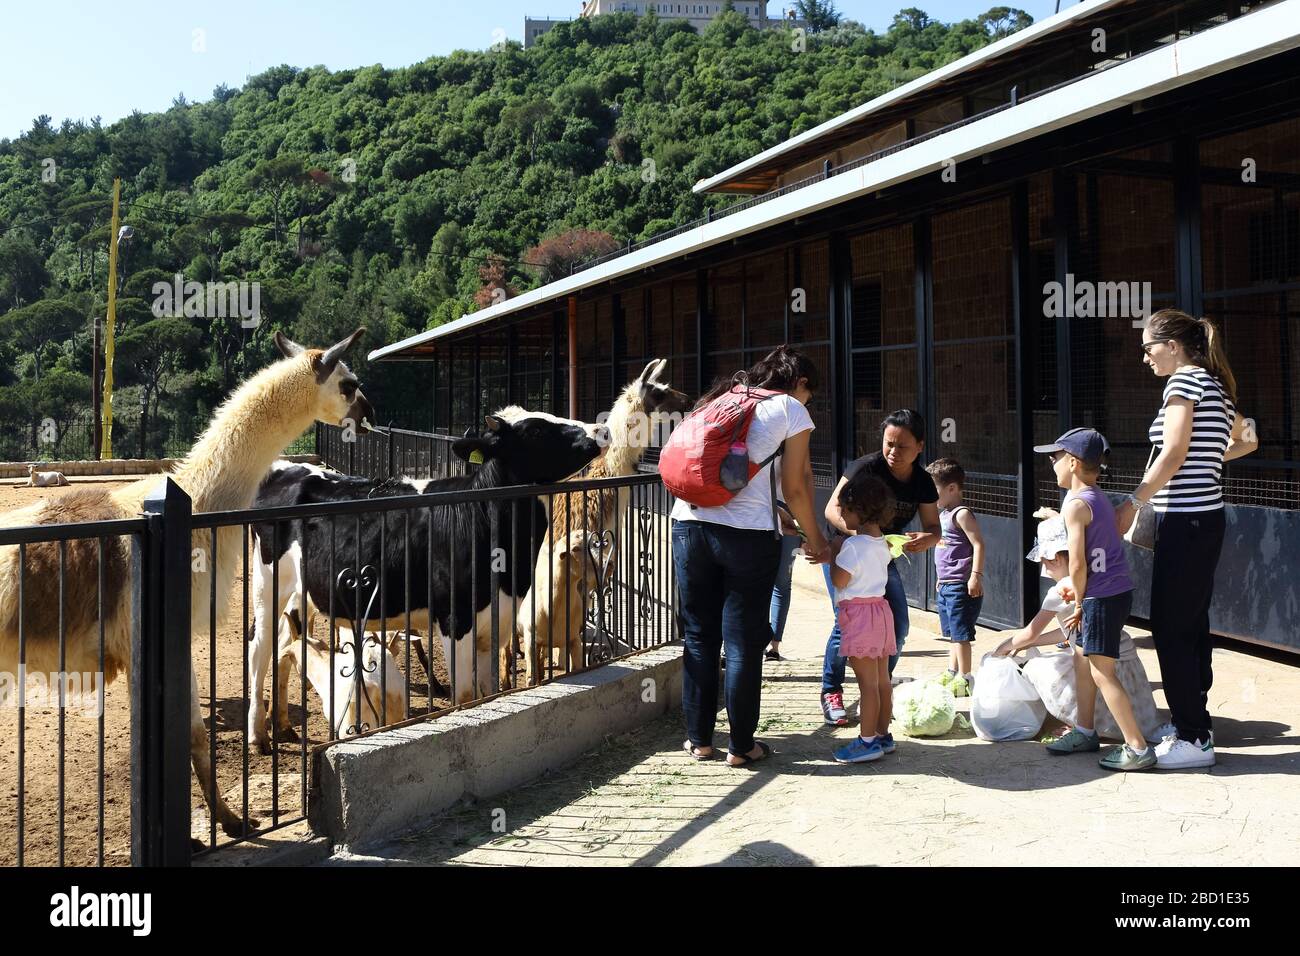 Mar Chaaya, Lebanon - May 27, 2017: Parents with their kids visiting the zoo in the leisure time. Stock Photo